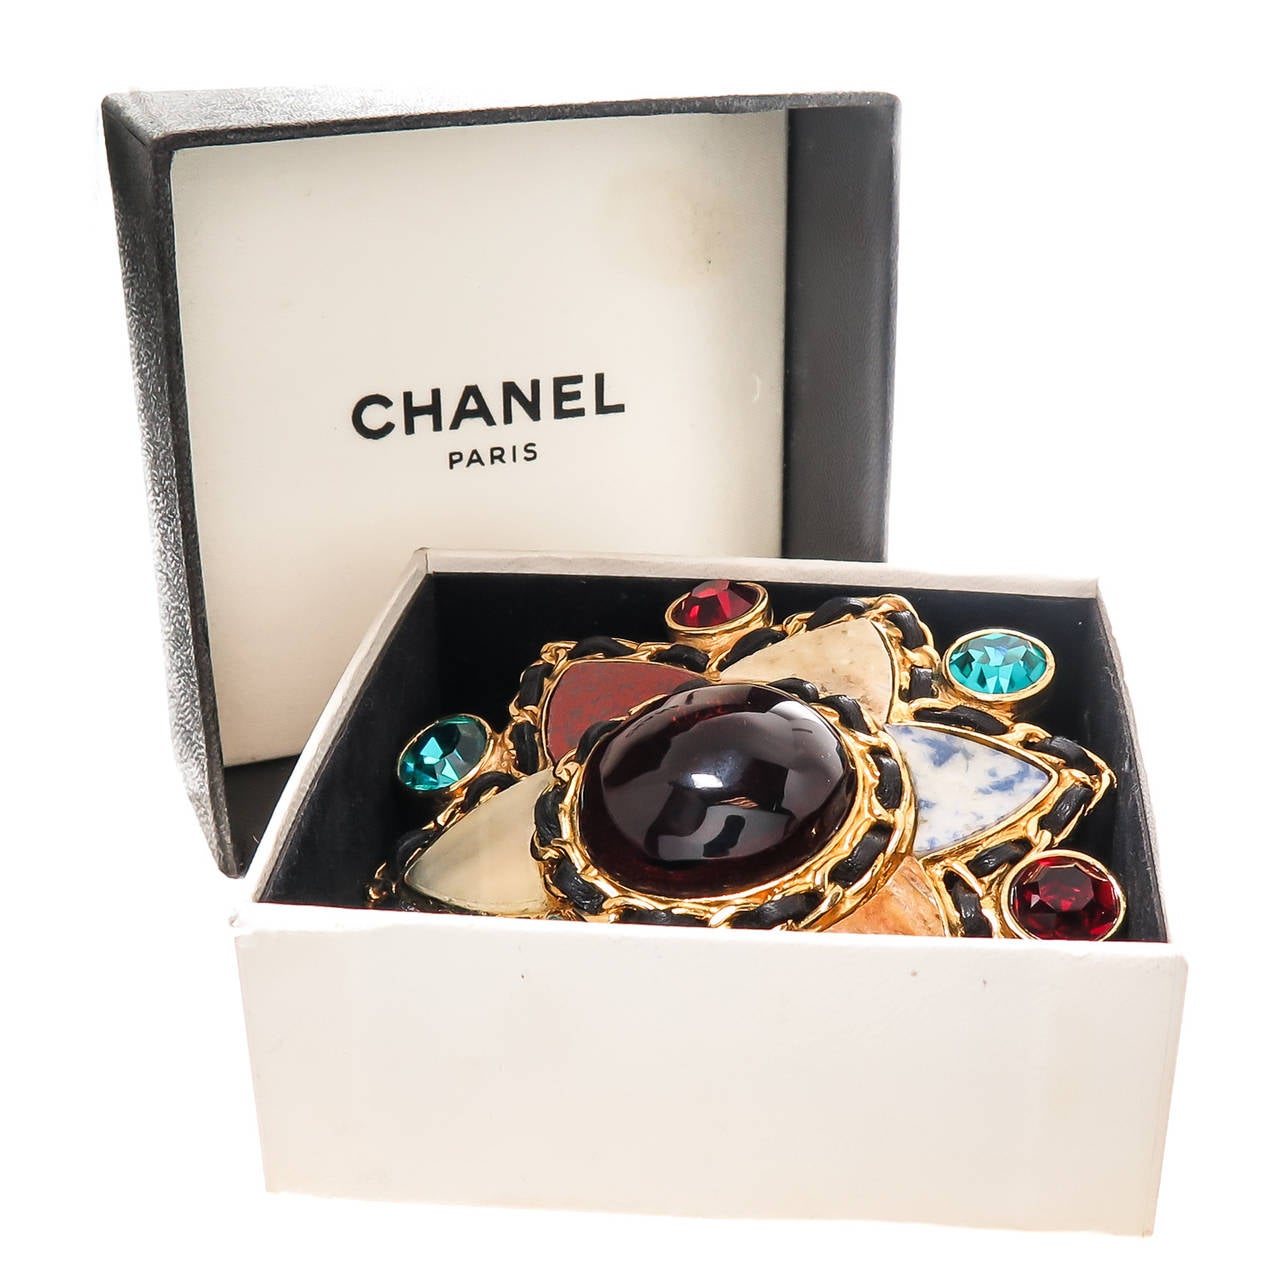 Chanel Large Gripoix Glass, faceted crystal and stone set Clip brooch, in a 6 point star motif with woven black leather around the border. Original Presentation Box. Measuring 3 inch in diameter.